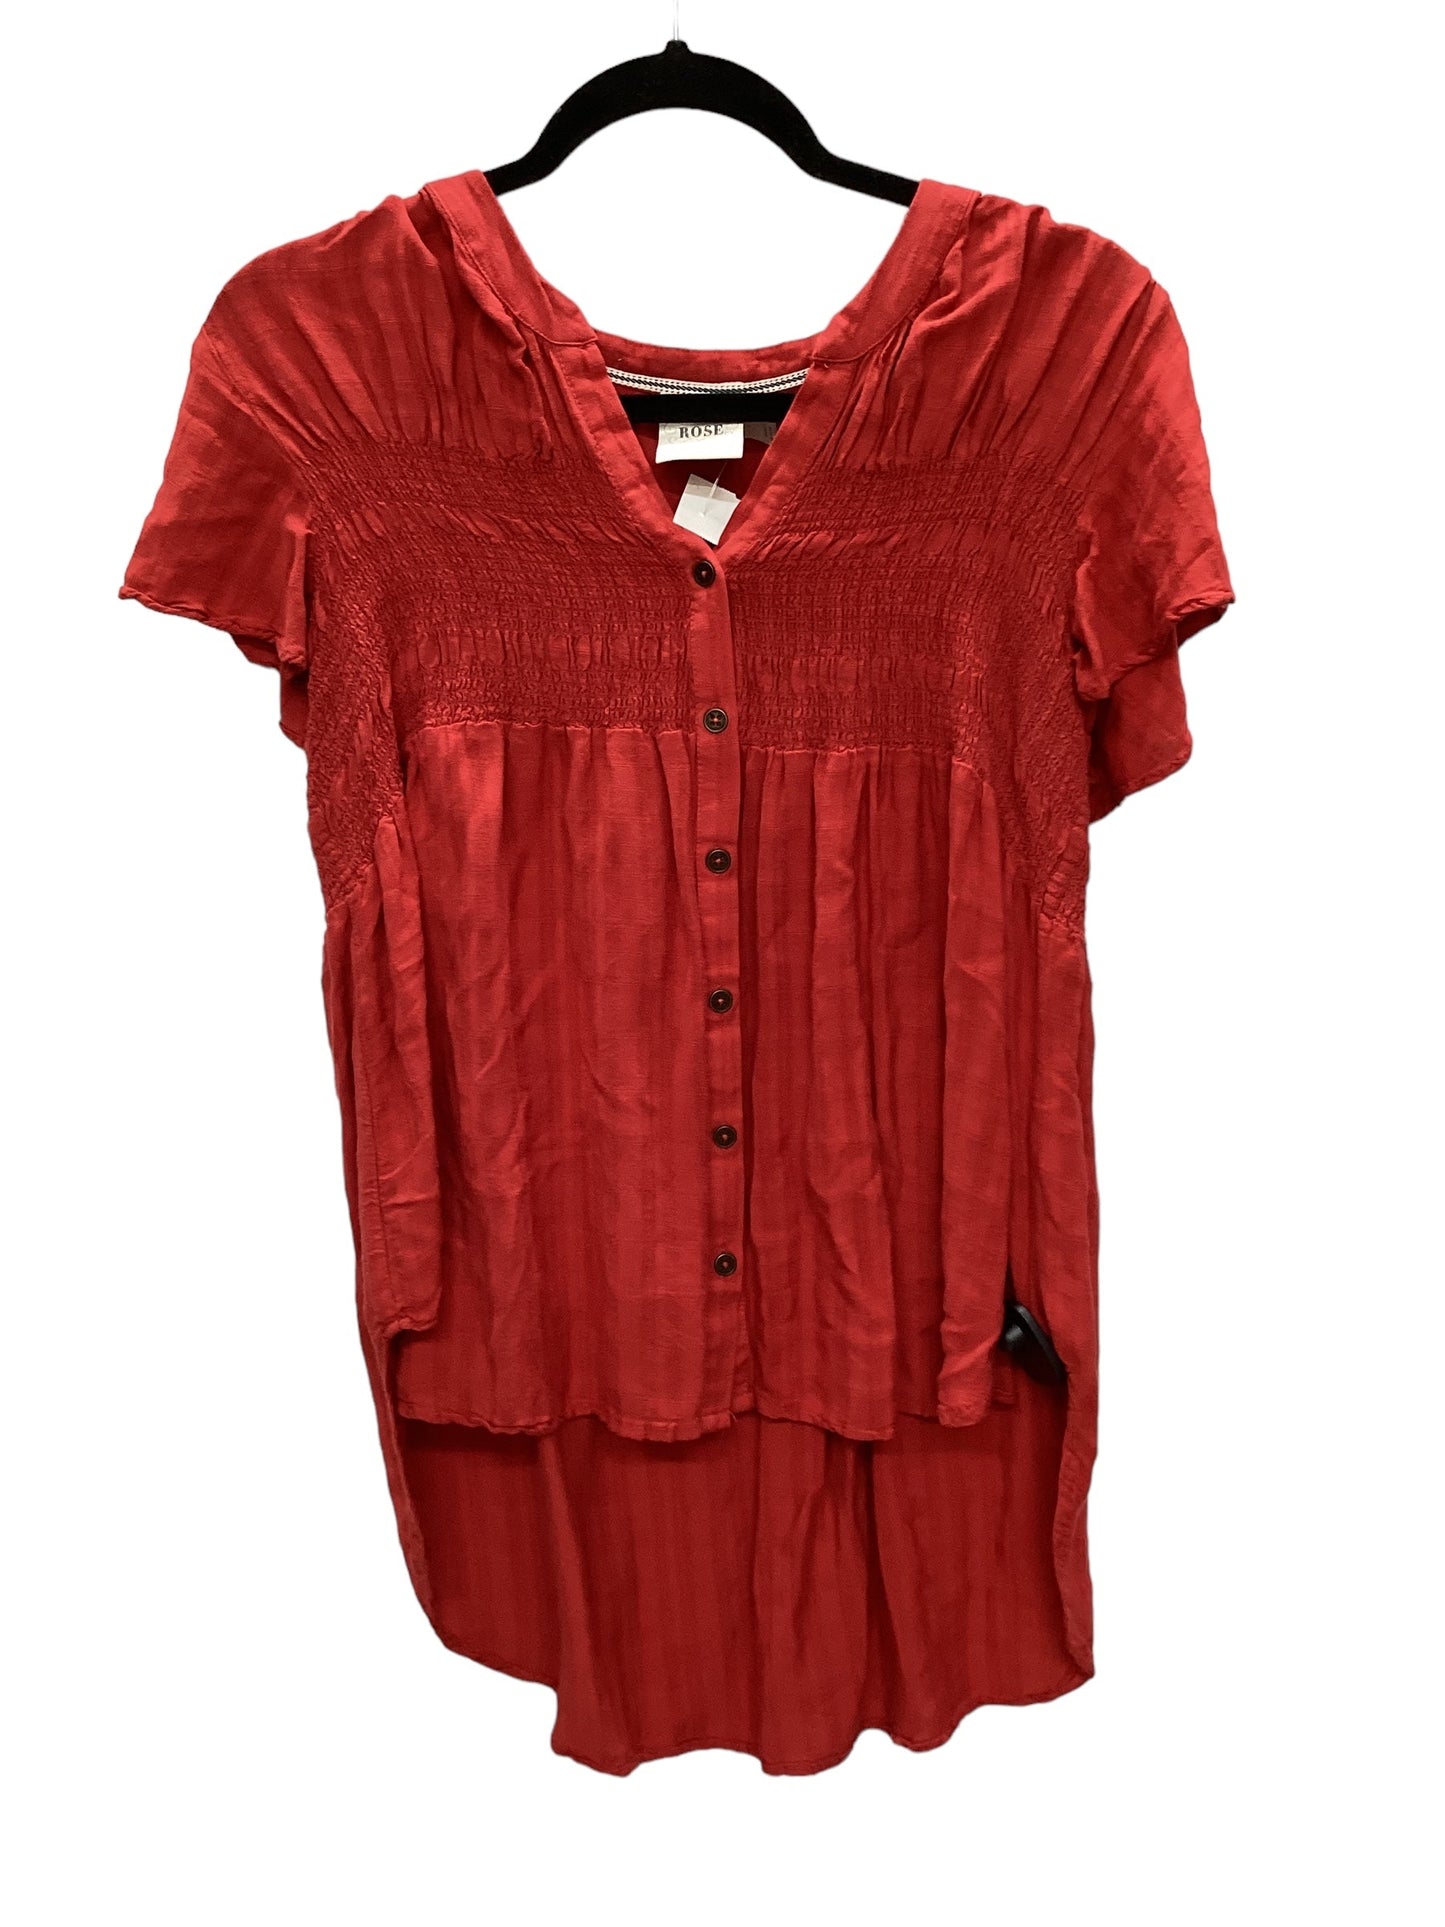 Red Top Short Sleeve Knox Rose, Size L